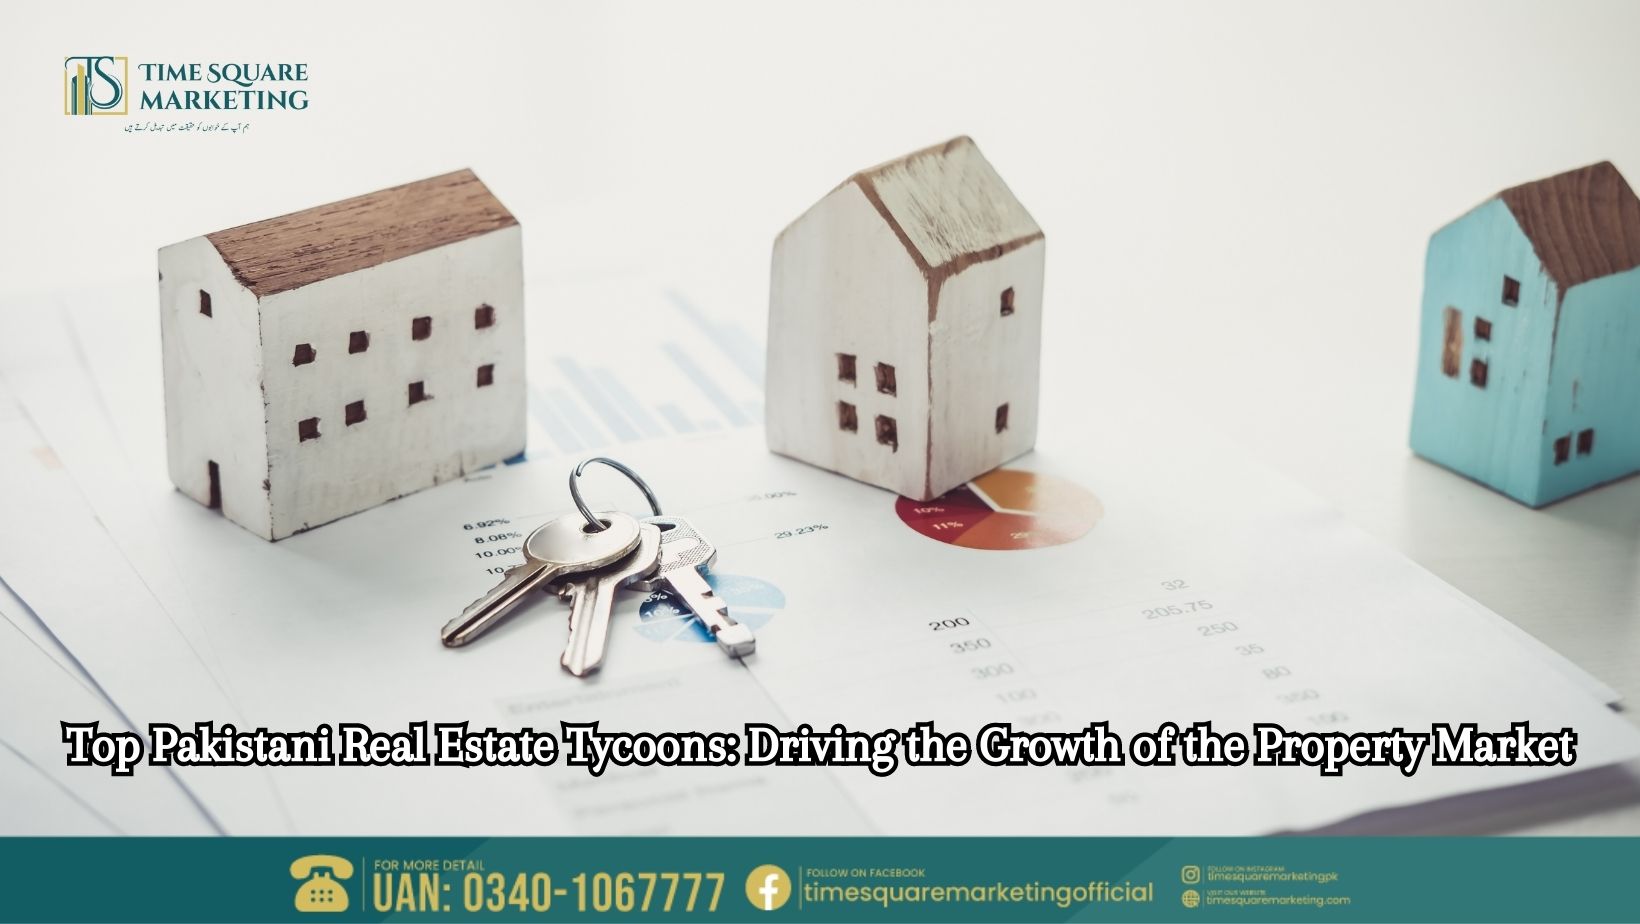 Top Pakistani Real Estate Tycoons Driving the Growth of the Property Market